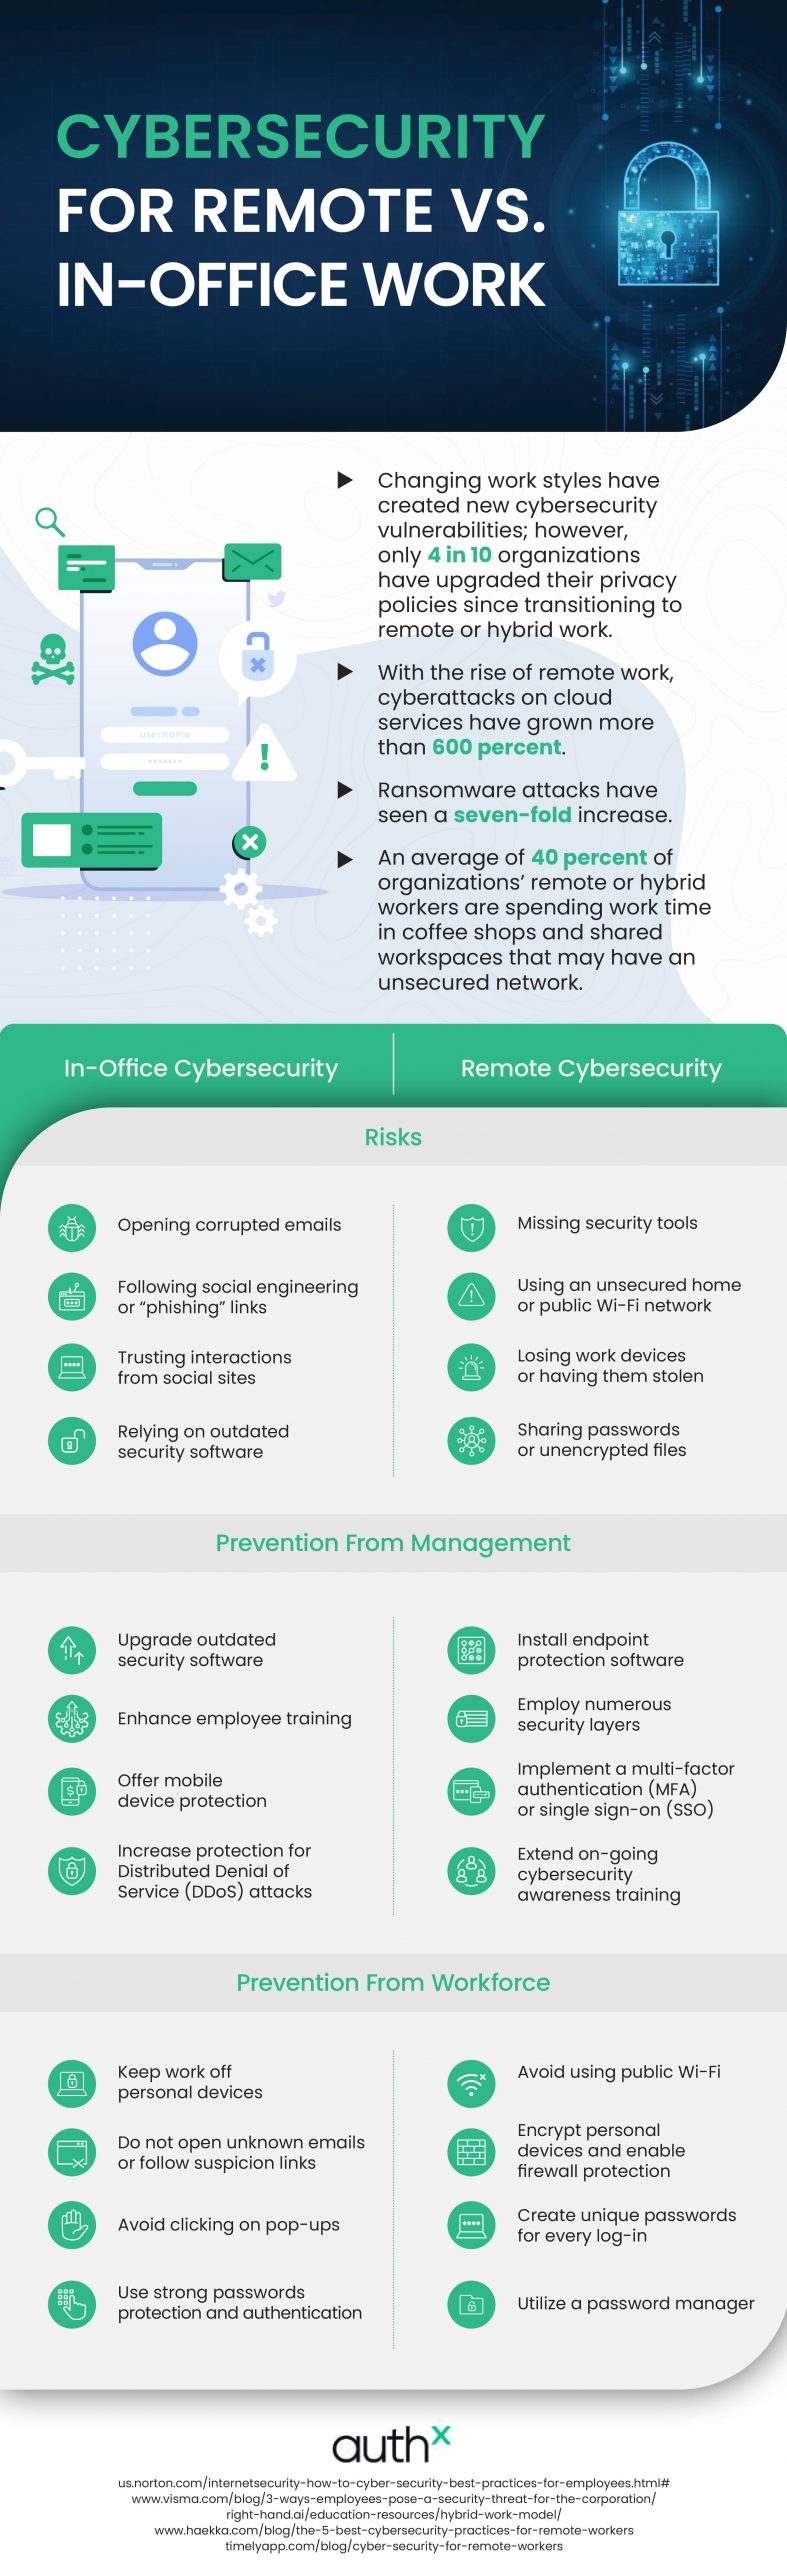 cybersecurity for remote vs in-office work infographic